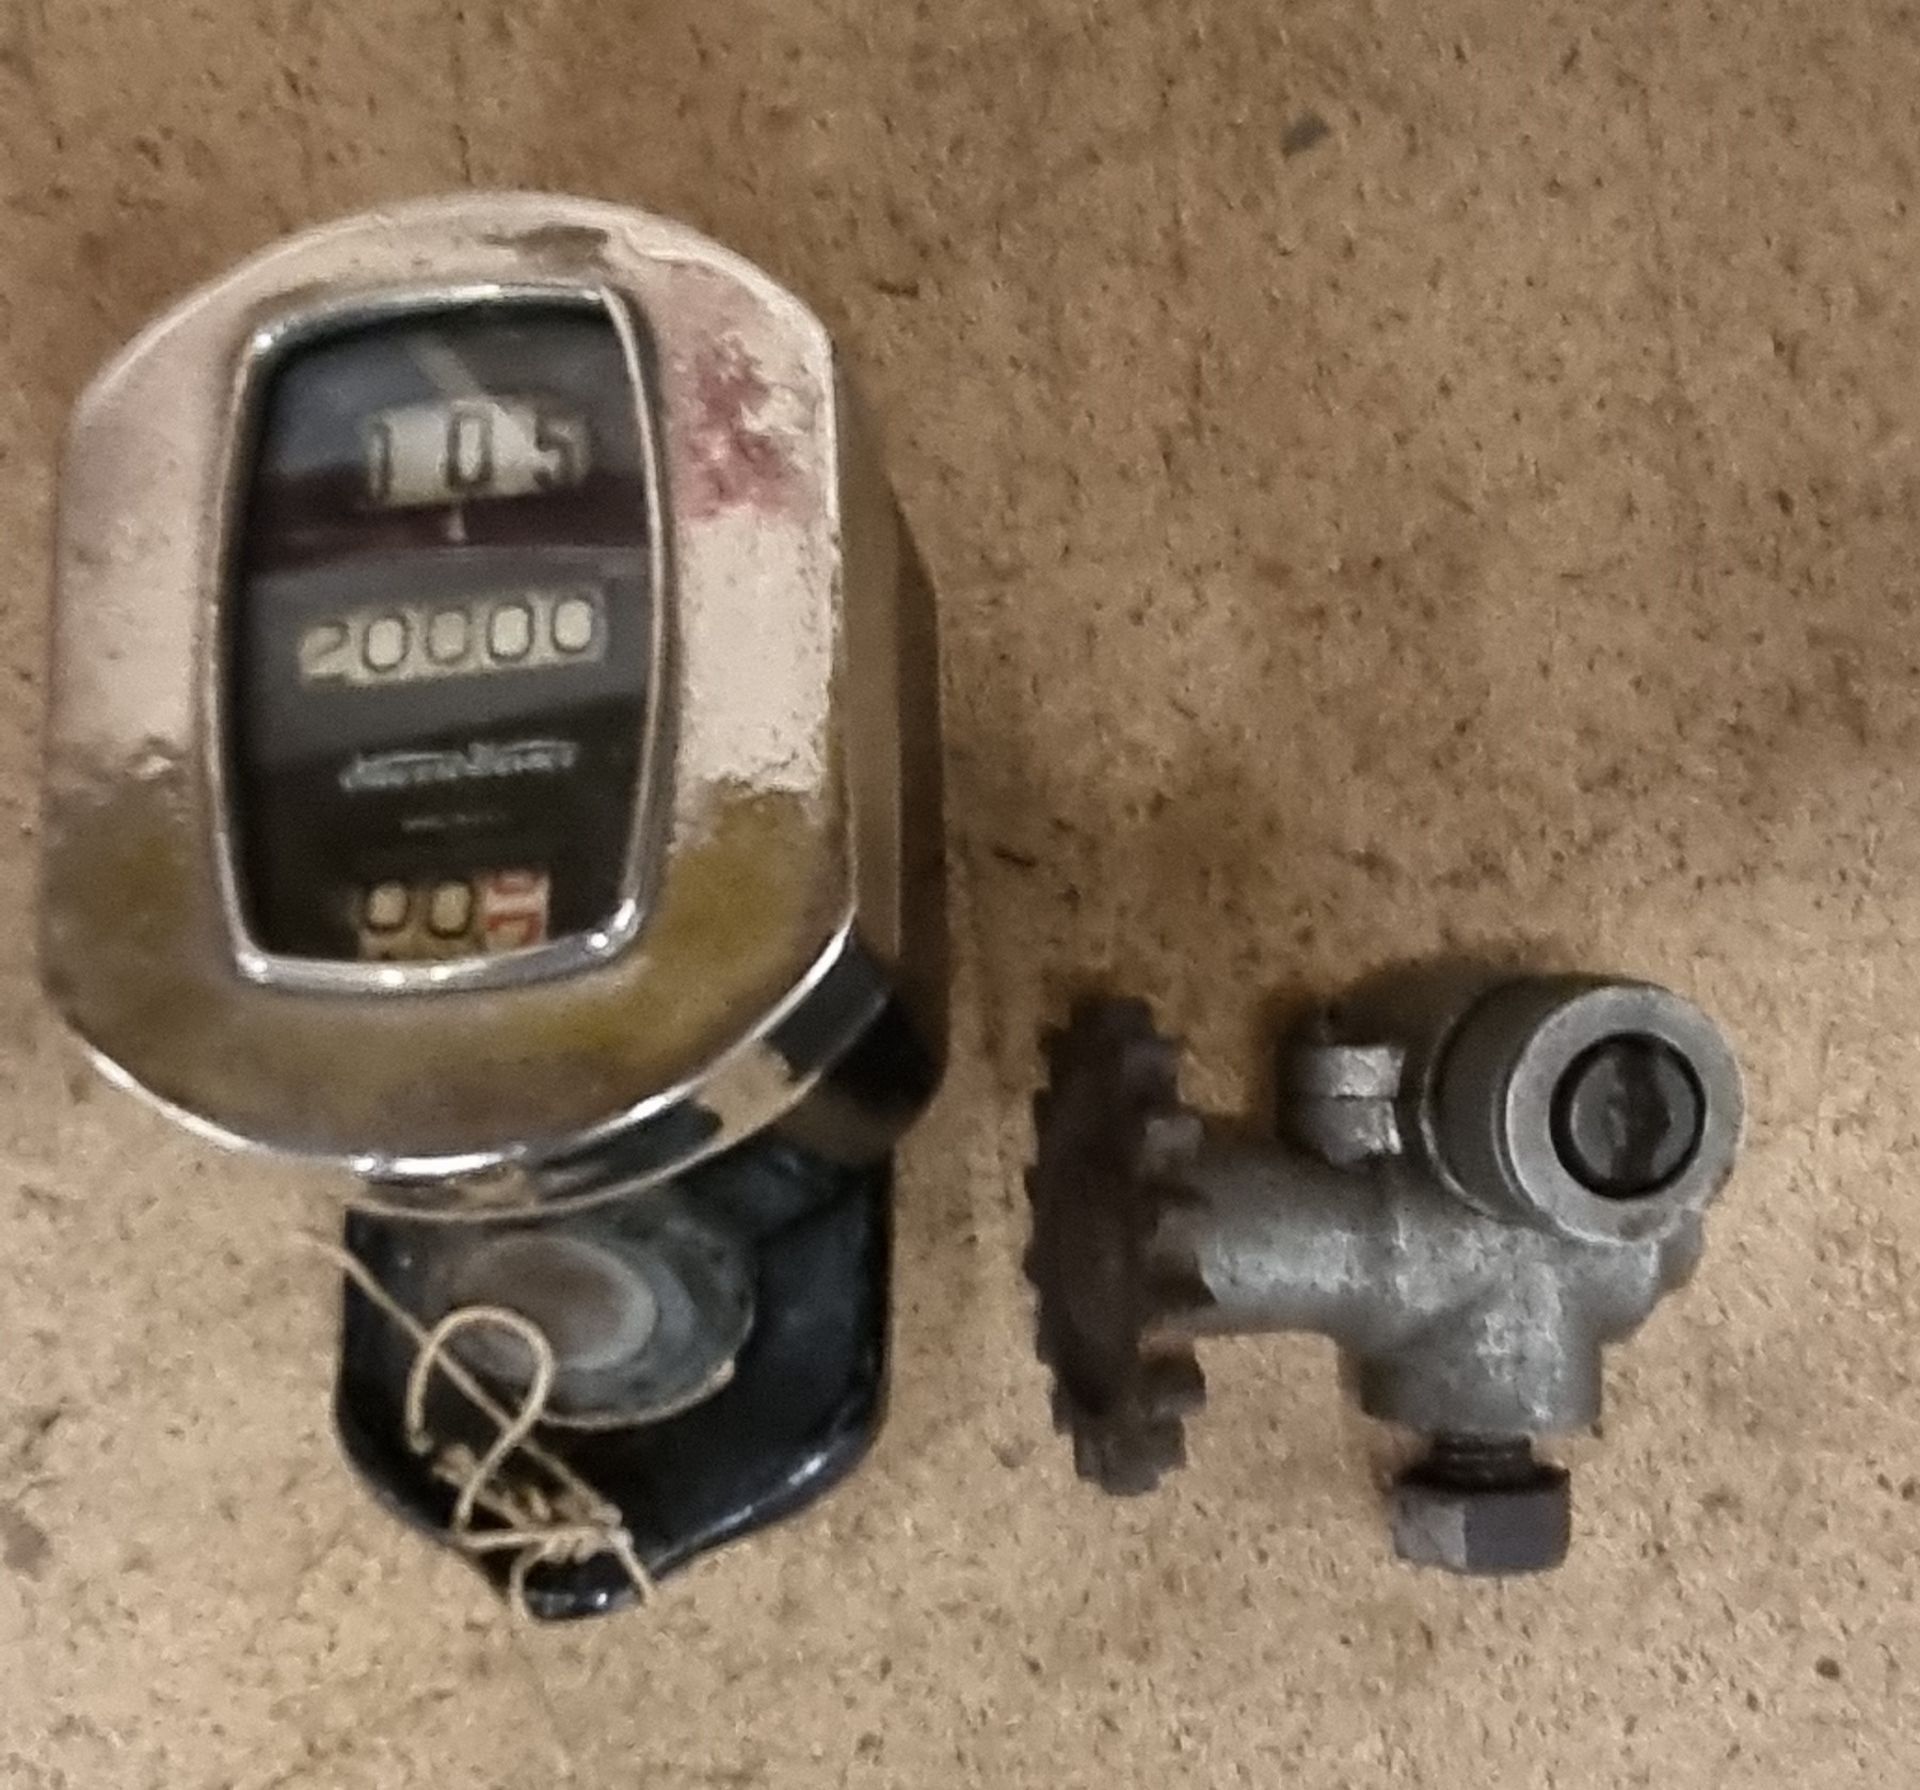 A rare Stewart Warner digital motorcycle speedo, together with a drive mechanism.